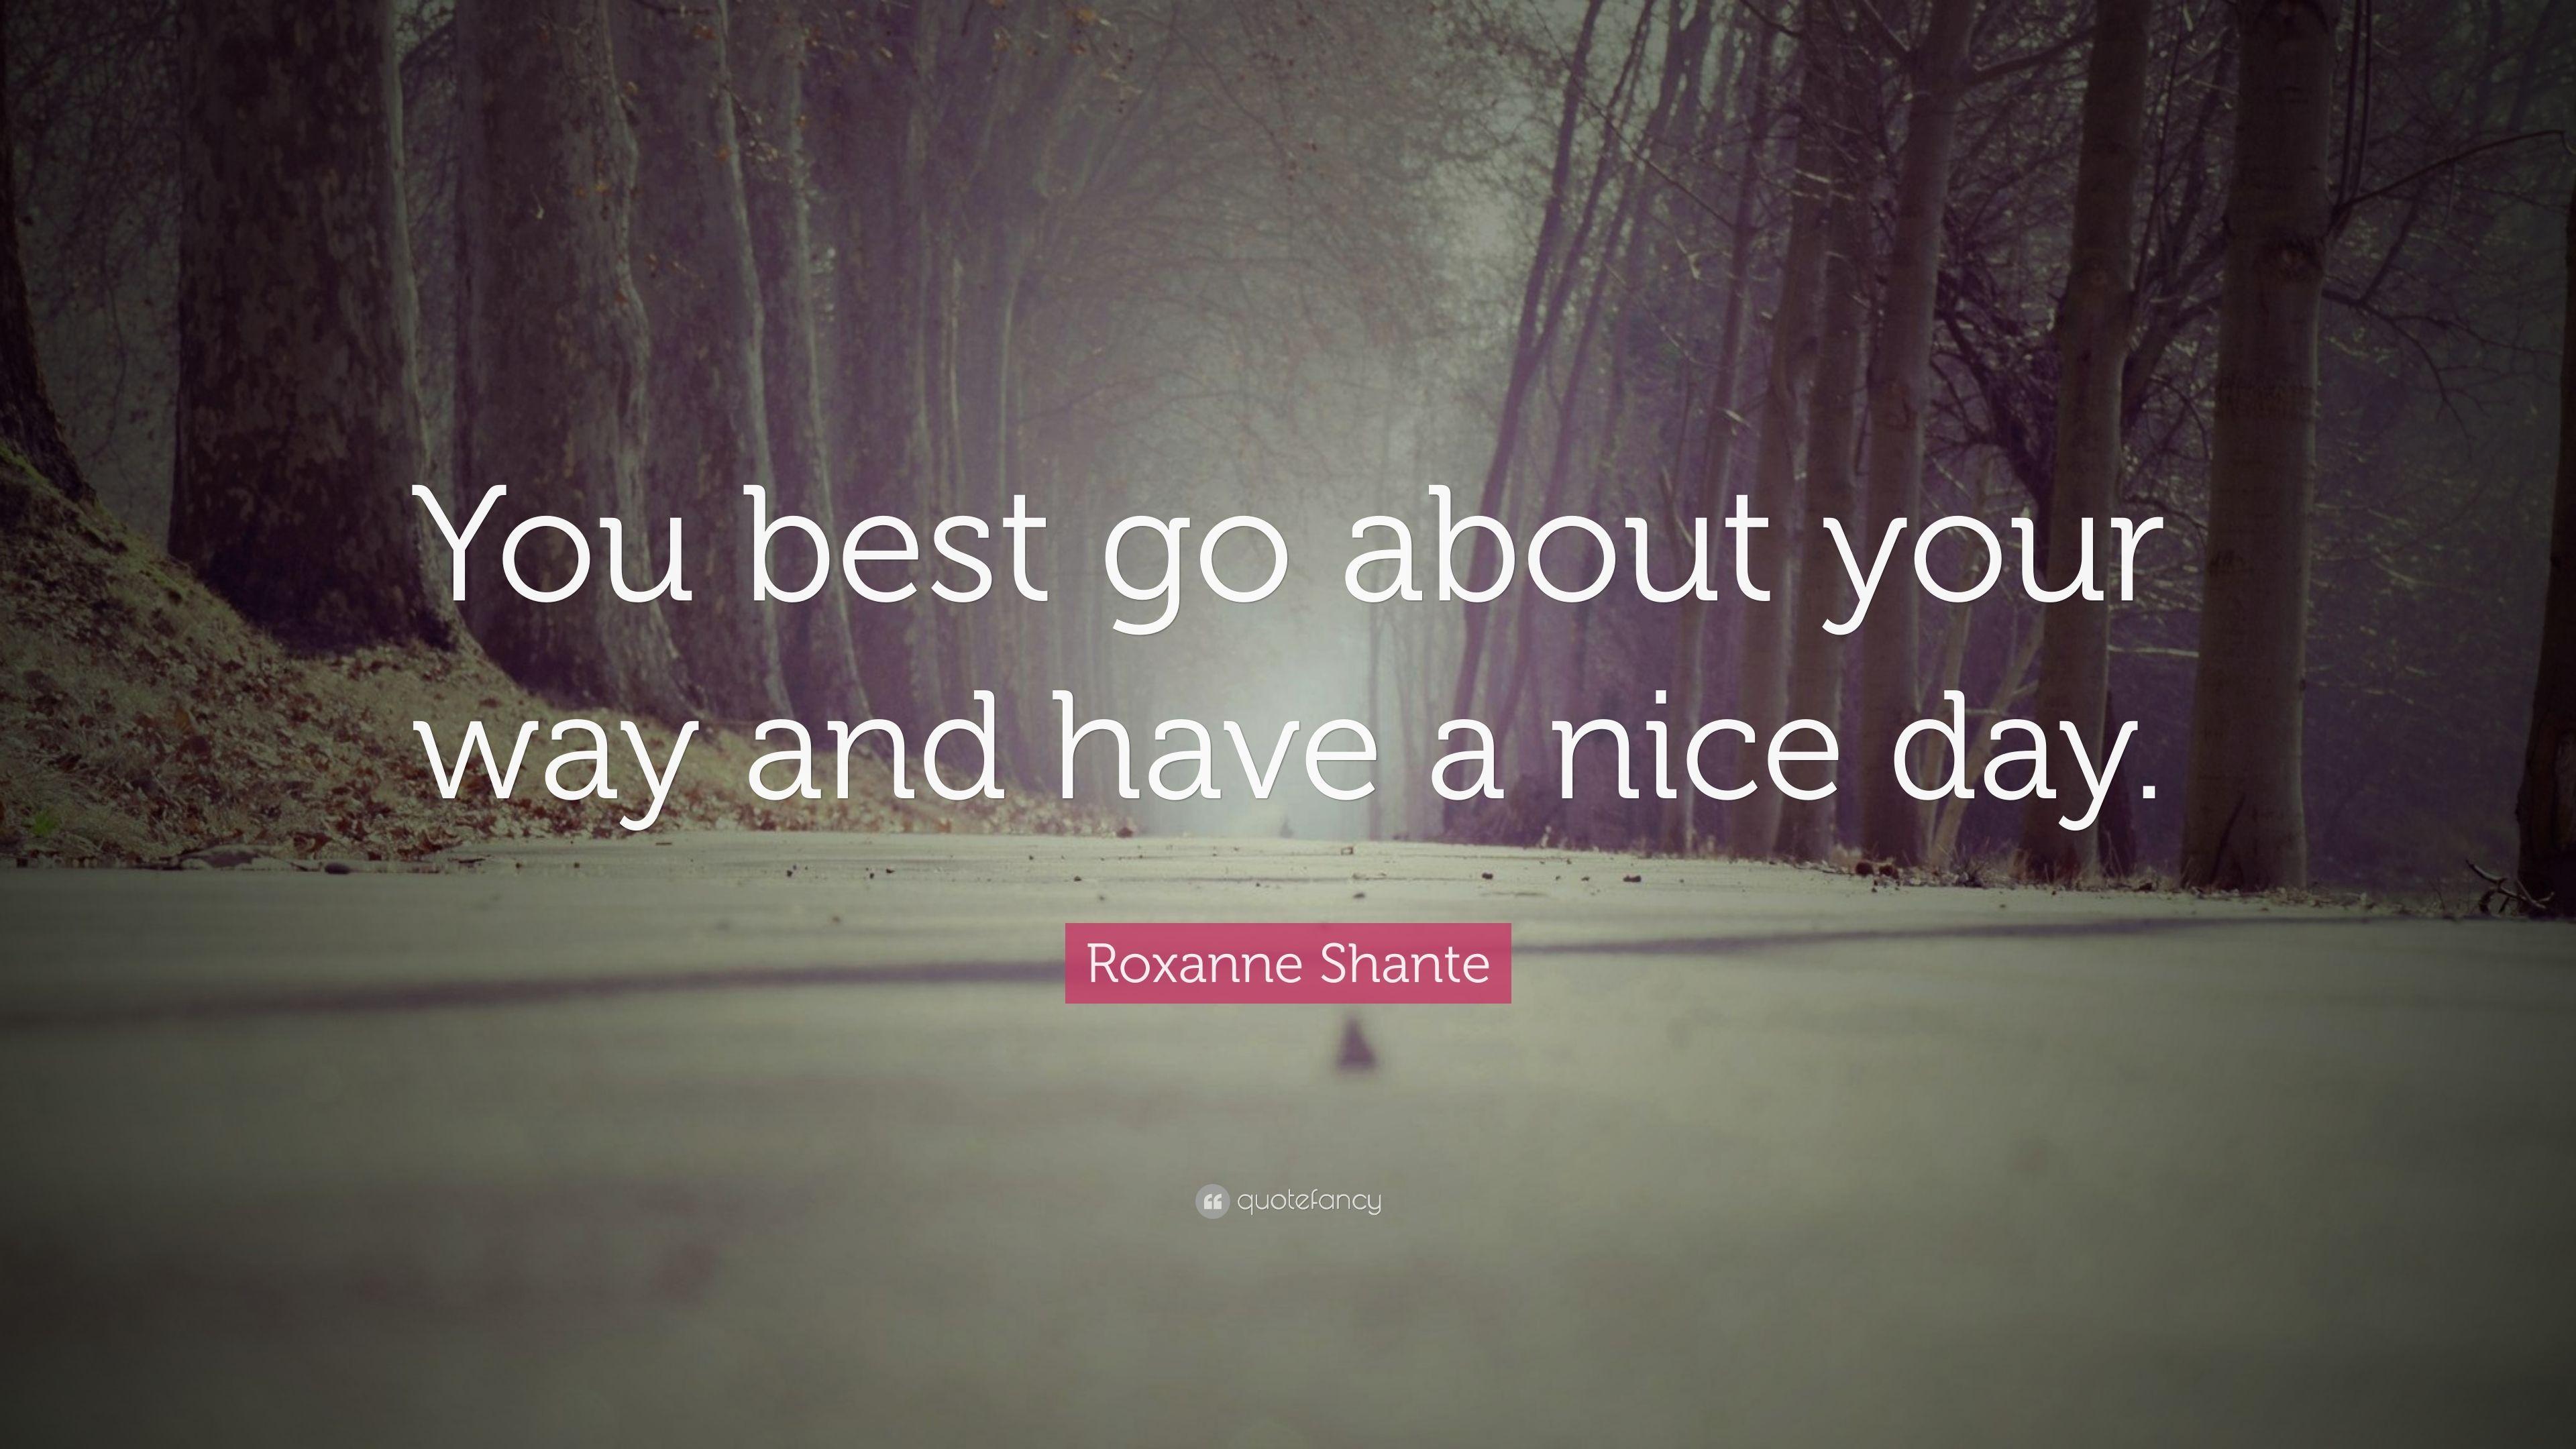 Roxanne Shante Quote: "You best go about your way and have a nice.